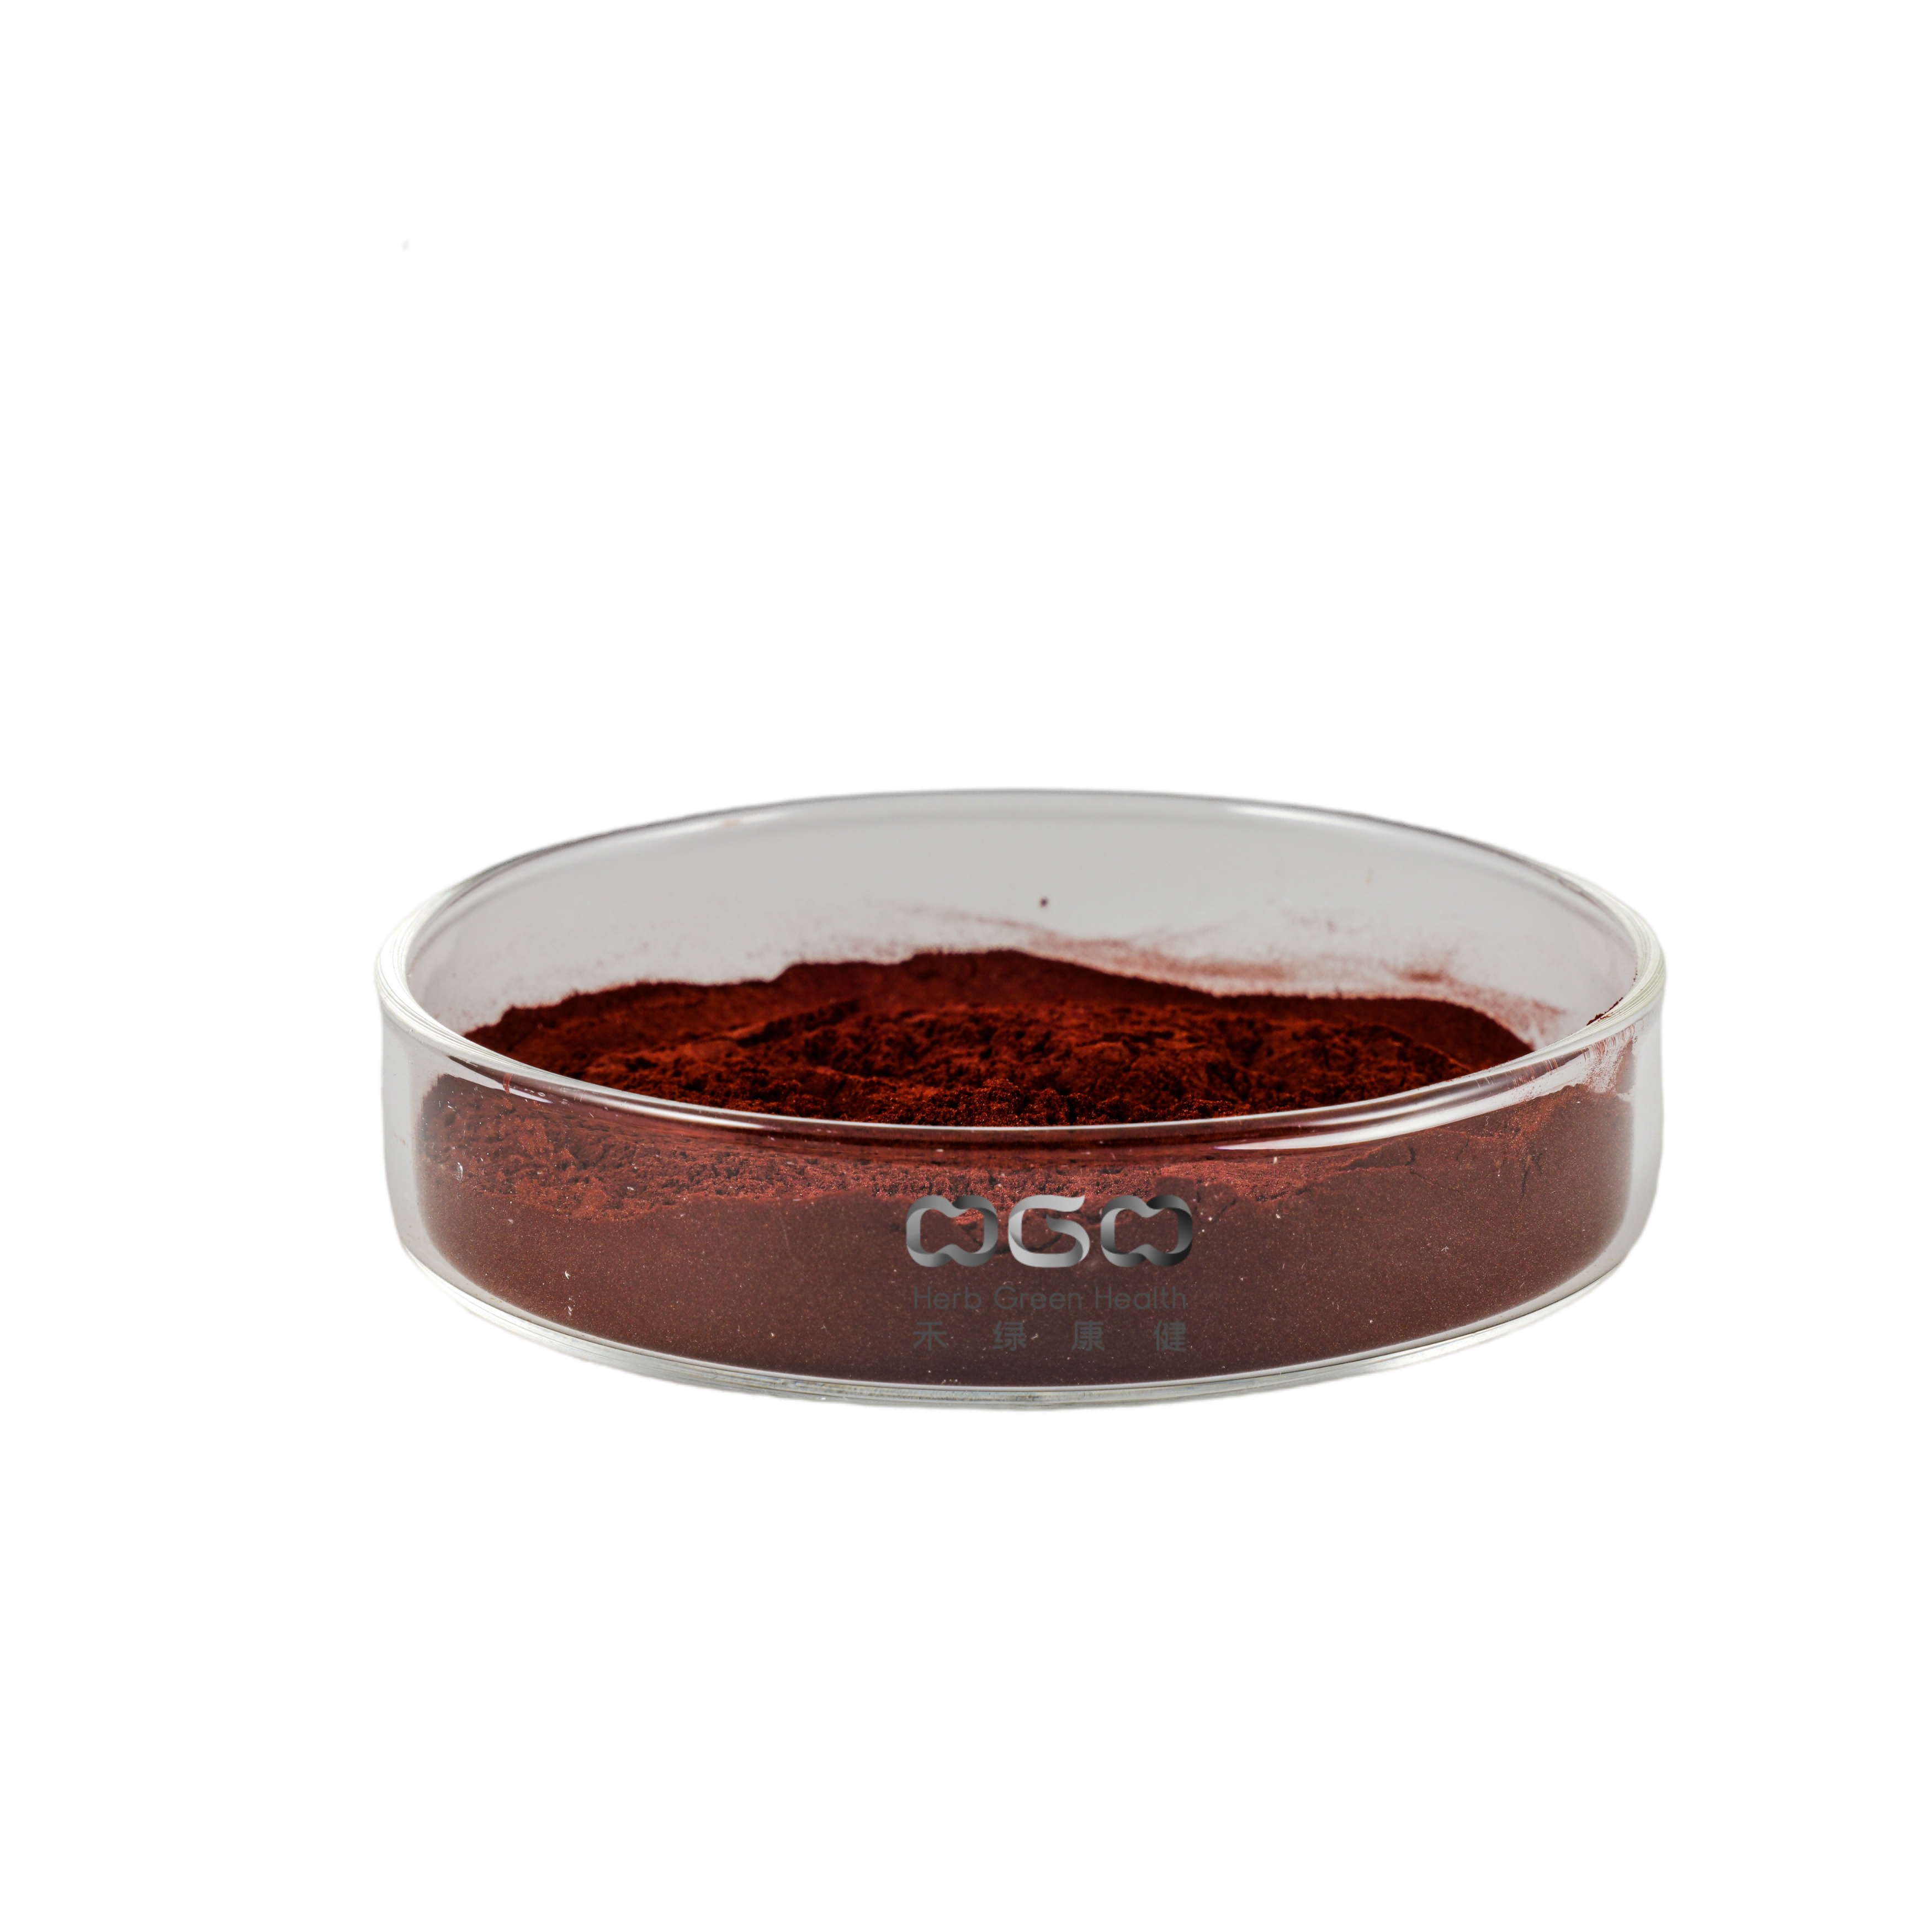 Black Currant SD Powder Anti-aging Anthocyanin For Lower Blood Pressure